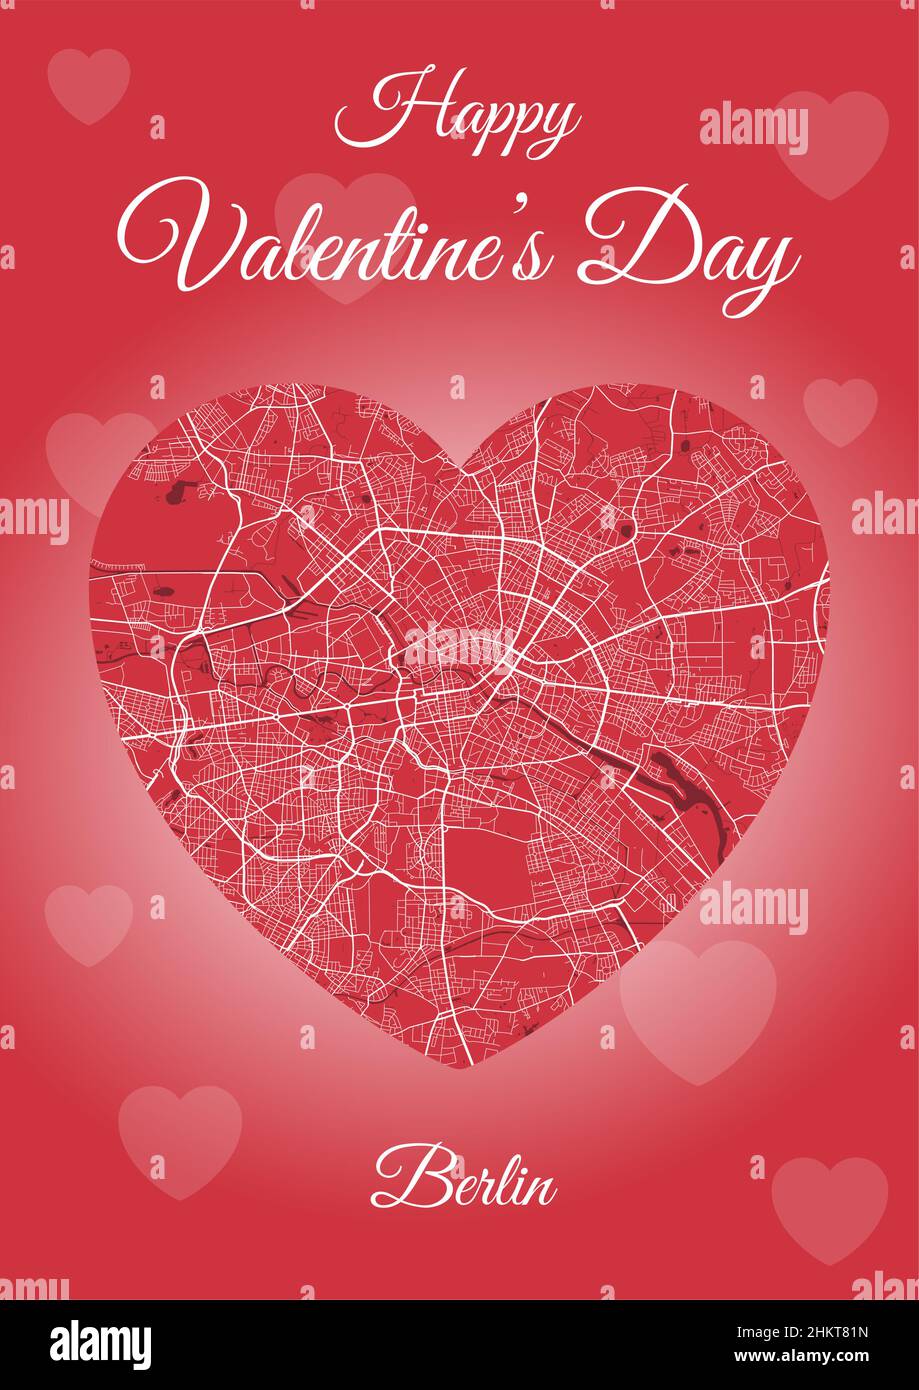 Happy Valentine's day holiday card with Berlin map in heart shape. Vertical A4 red color vector illustration. Love city travel cityscape. Stock Vector